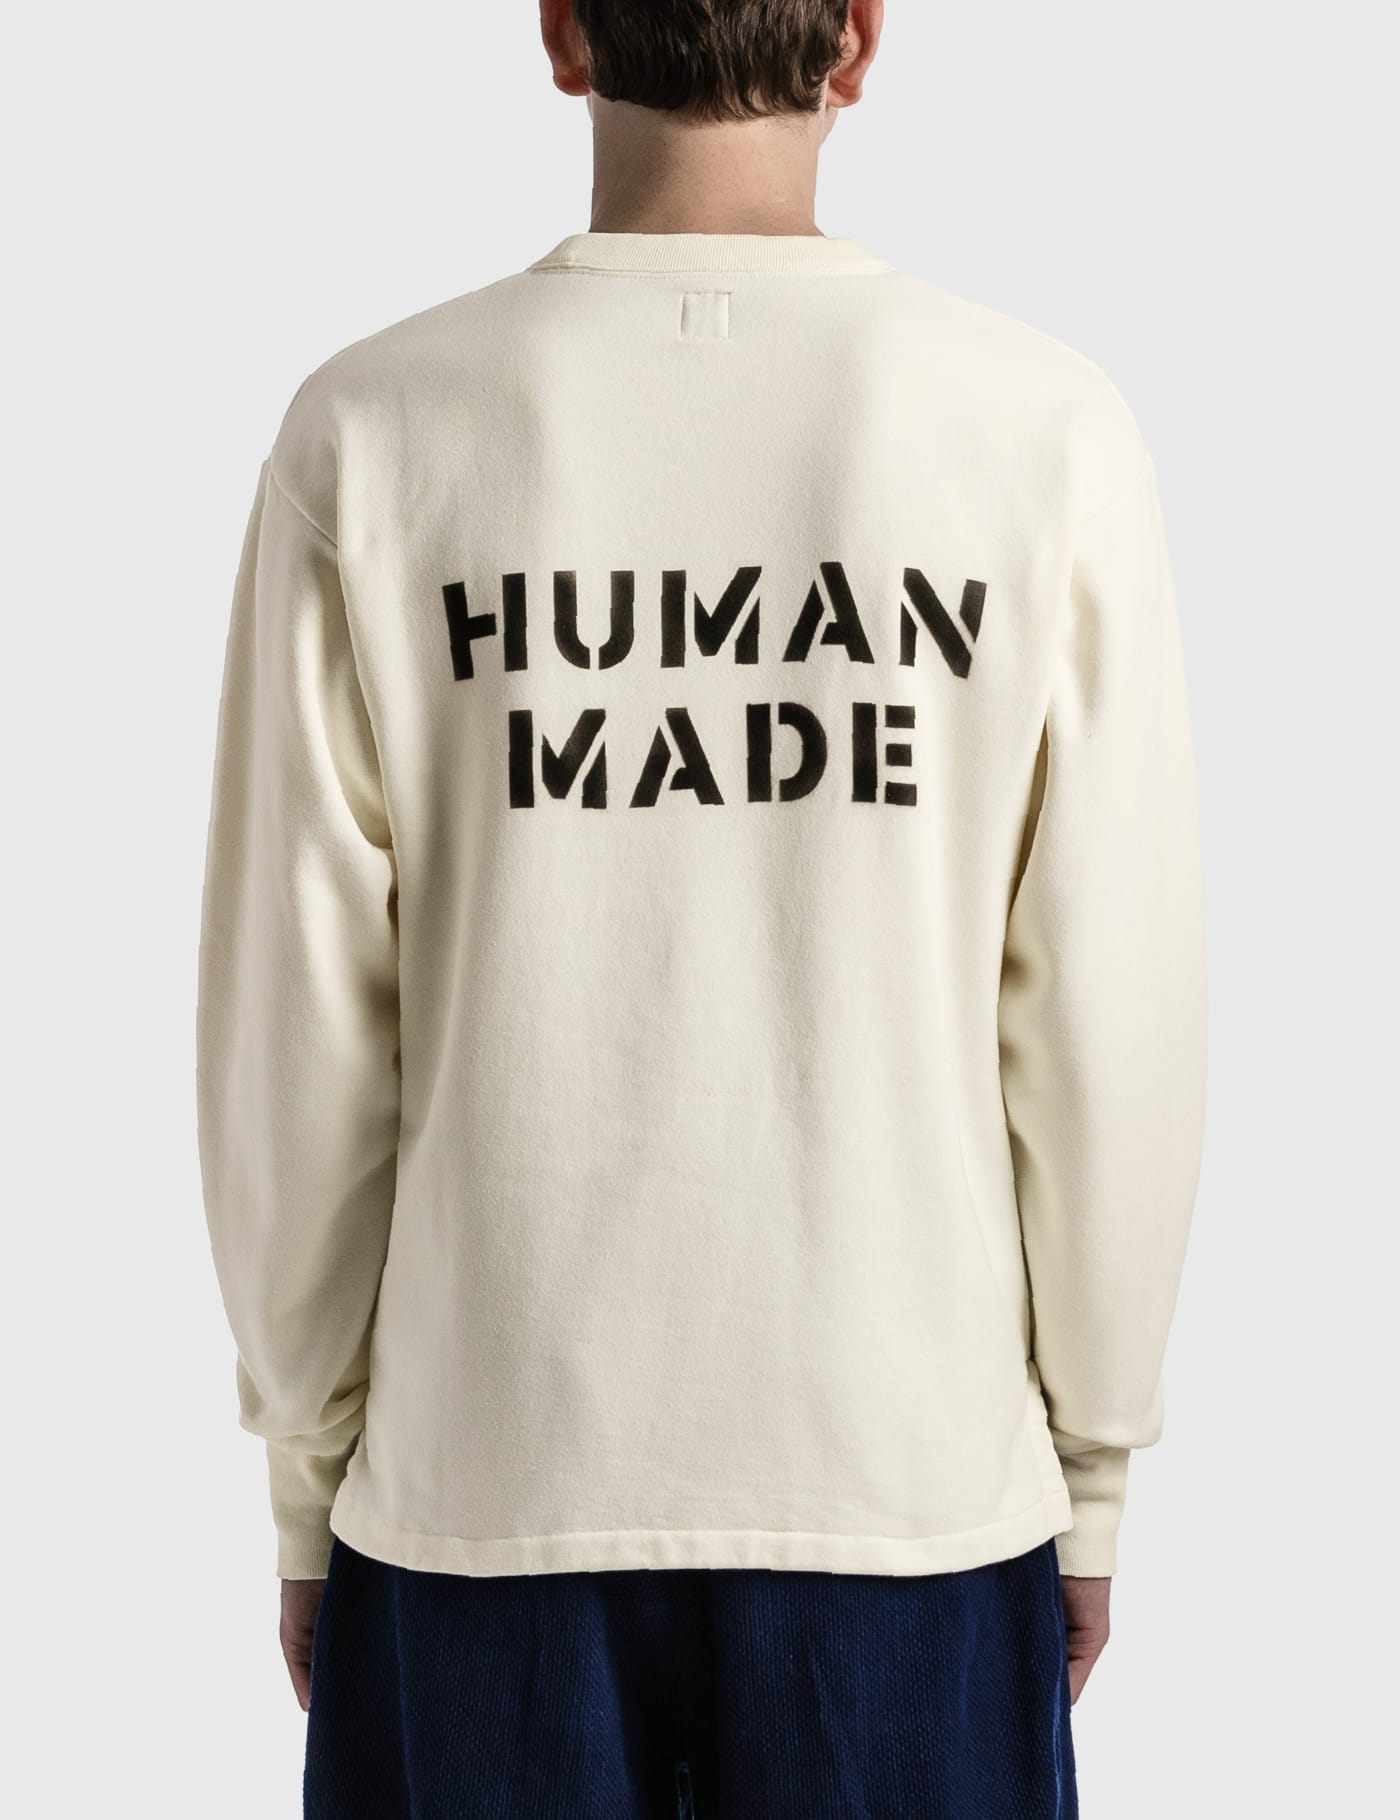 Human Made - Human Made Military Sweatshirt | HBX - Globally Curated  Fashion and Lifestyle by Hypebeast